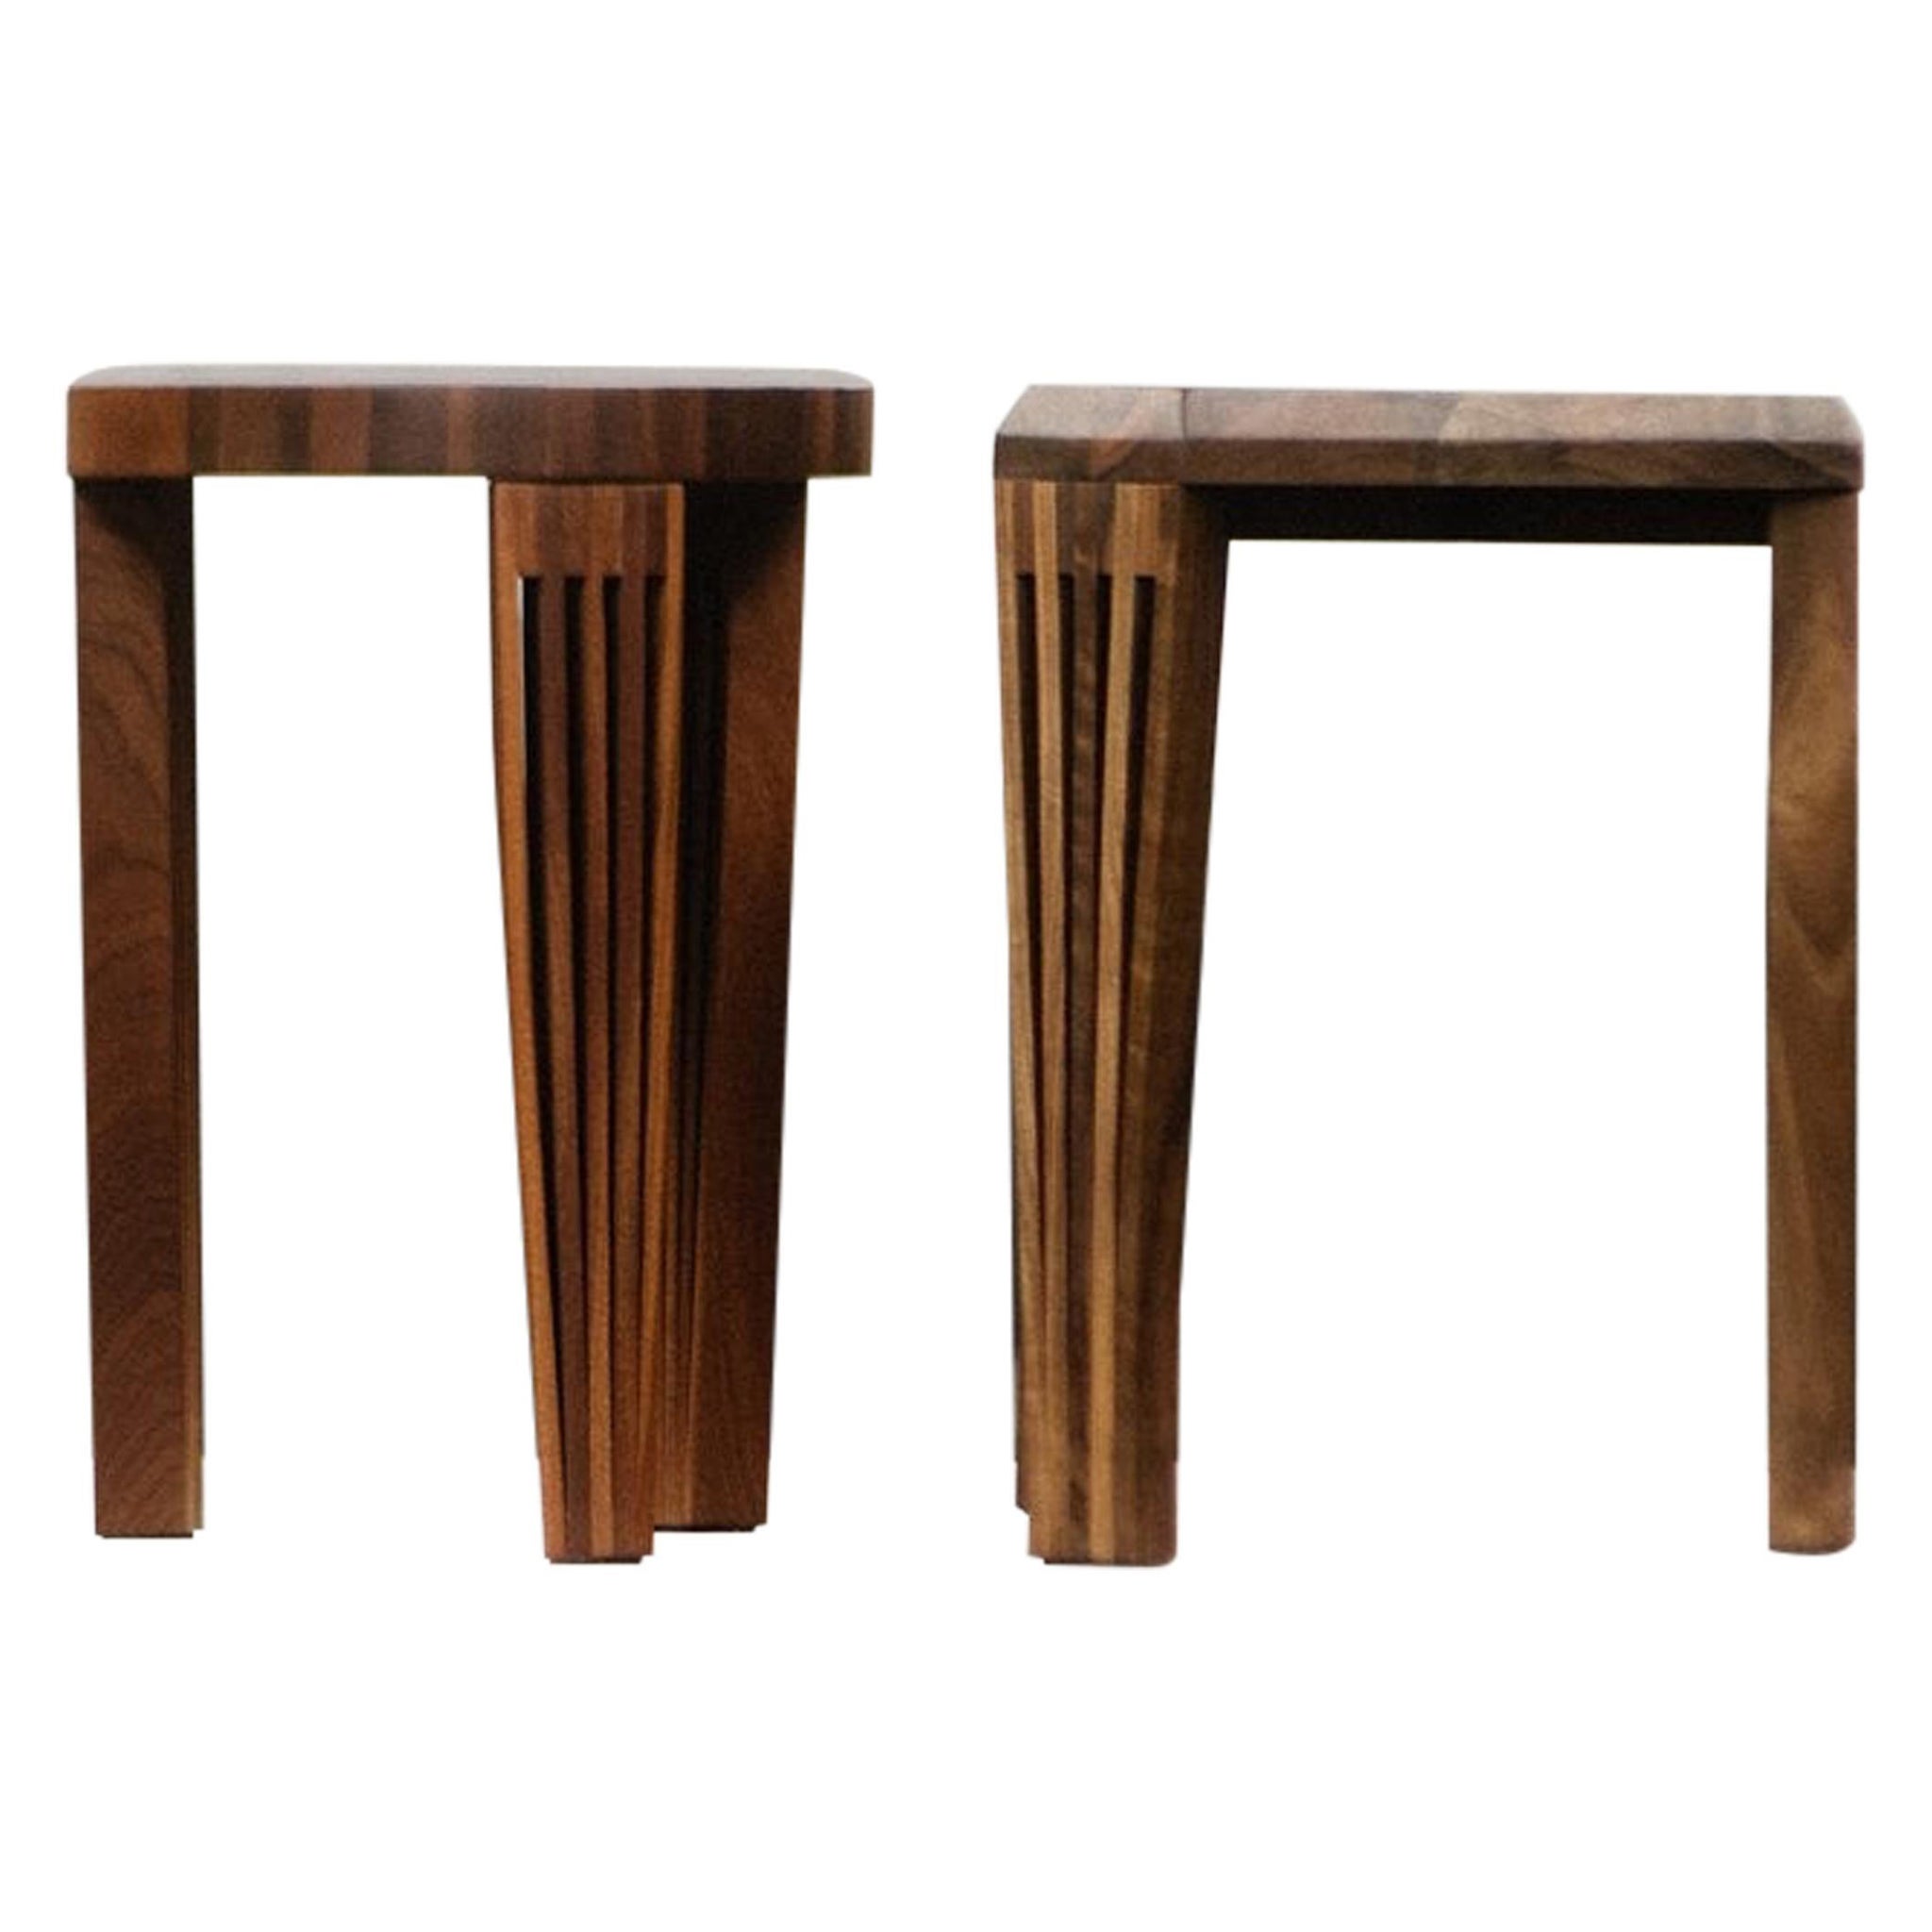 Set of 2 Redemption Stools by Albert Potgieter Designs For Sale